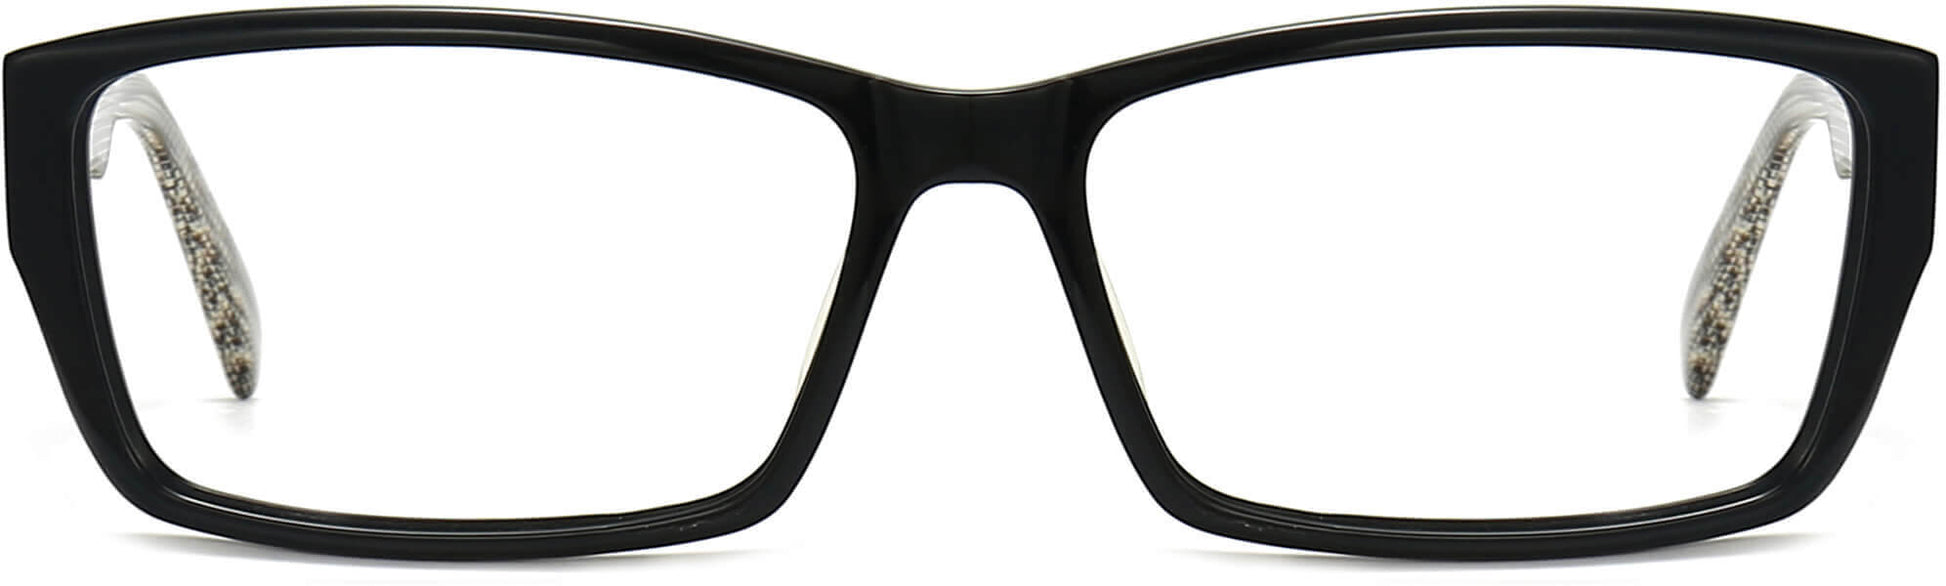 Moises Rectangle Black Eyeglasses from ANRRI, front view